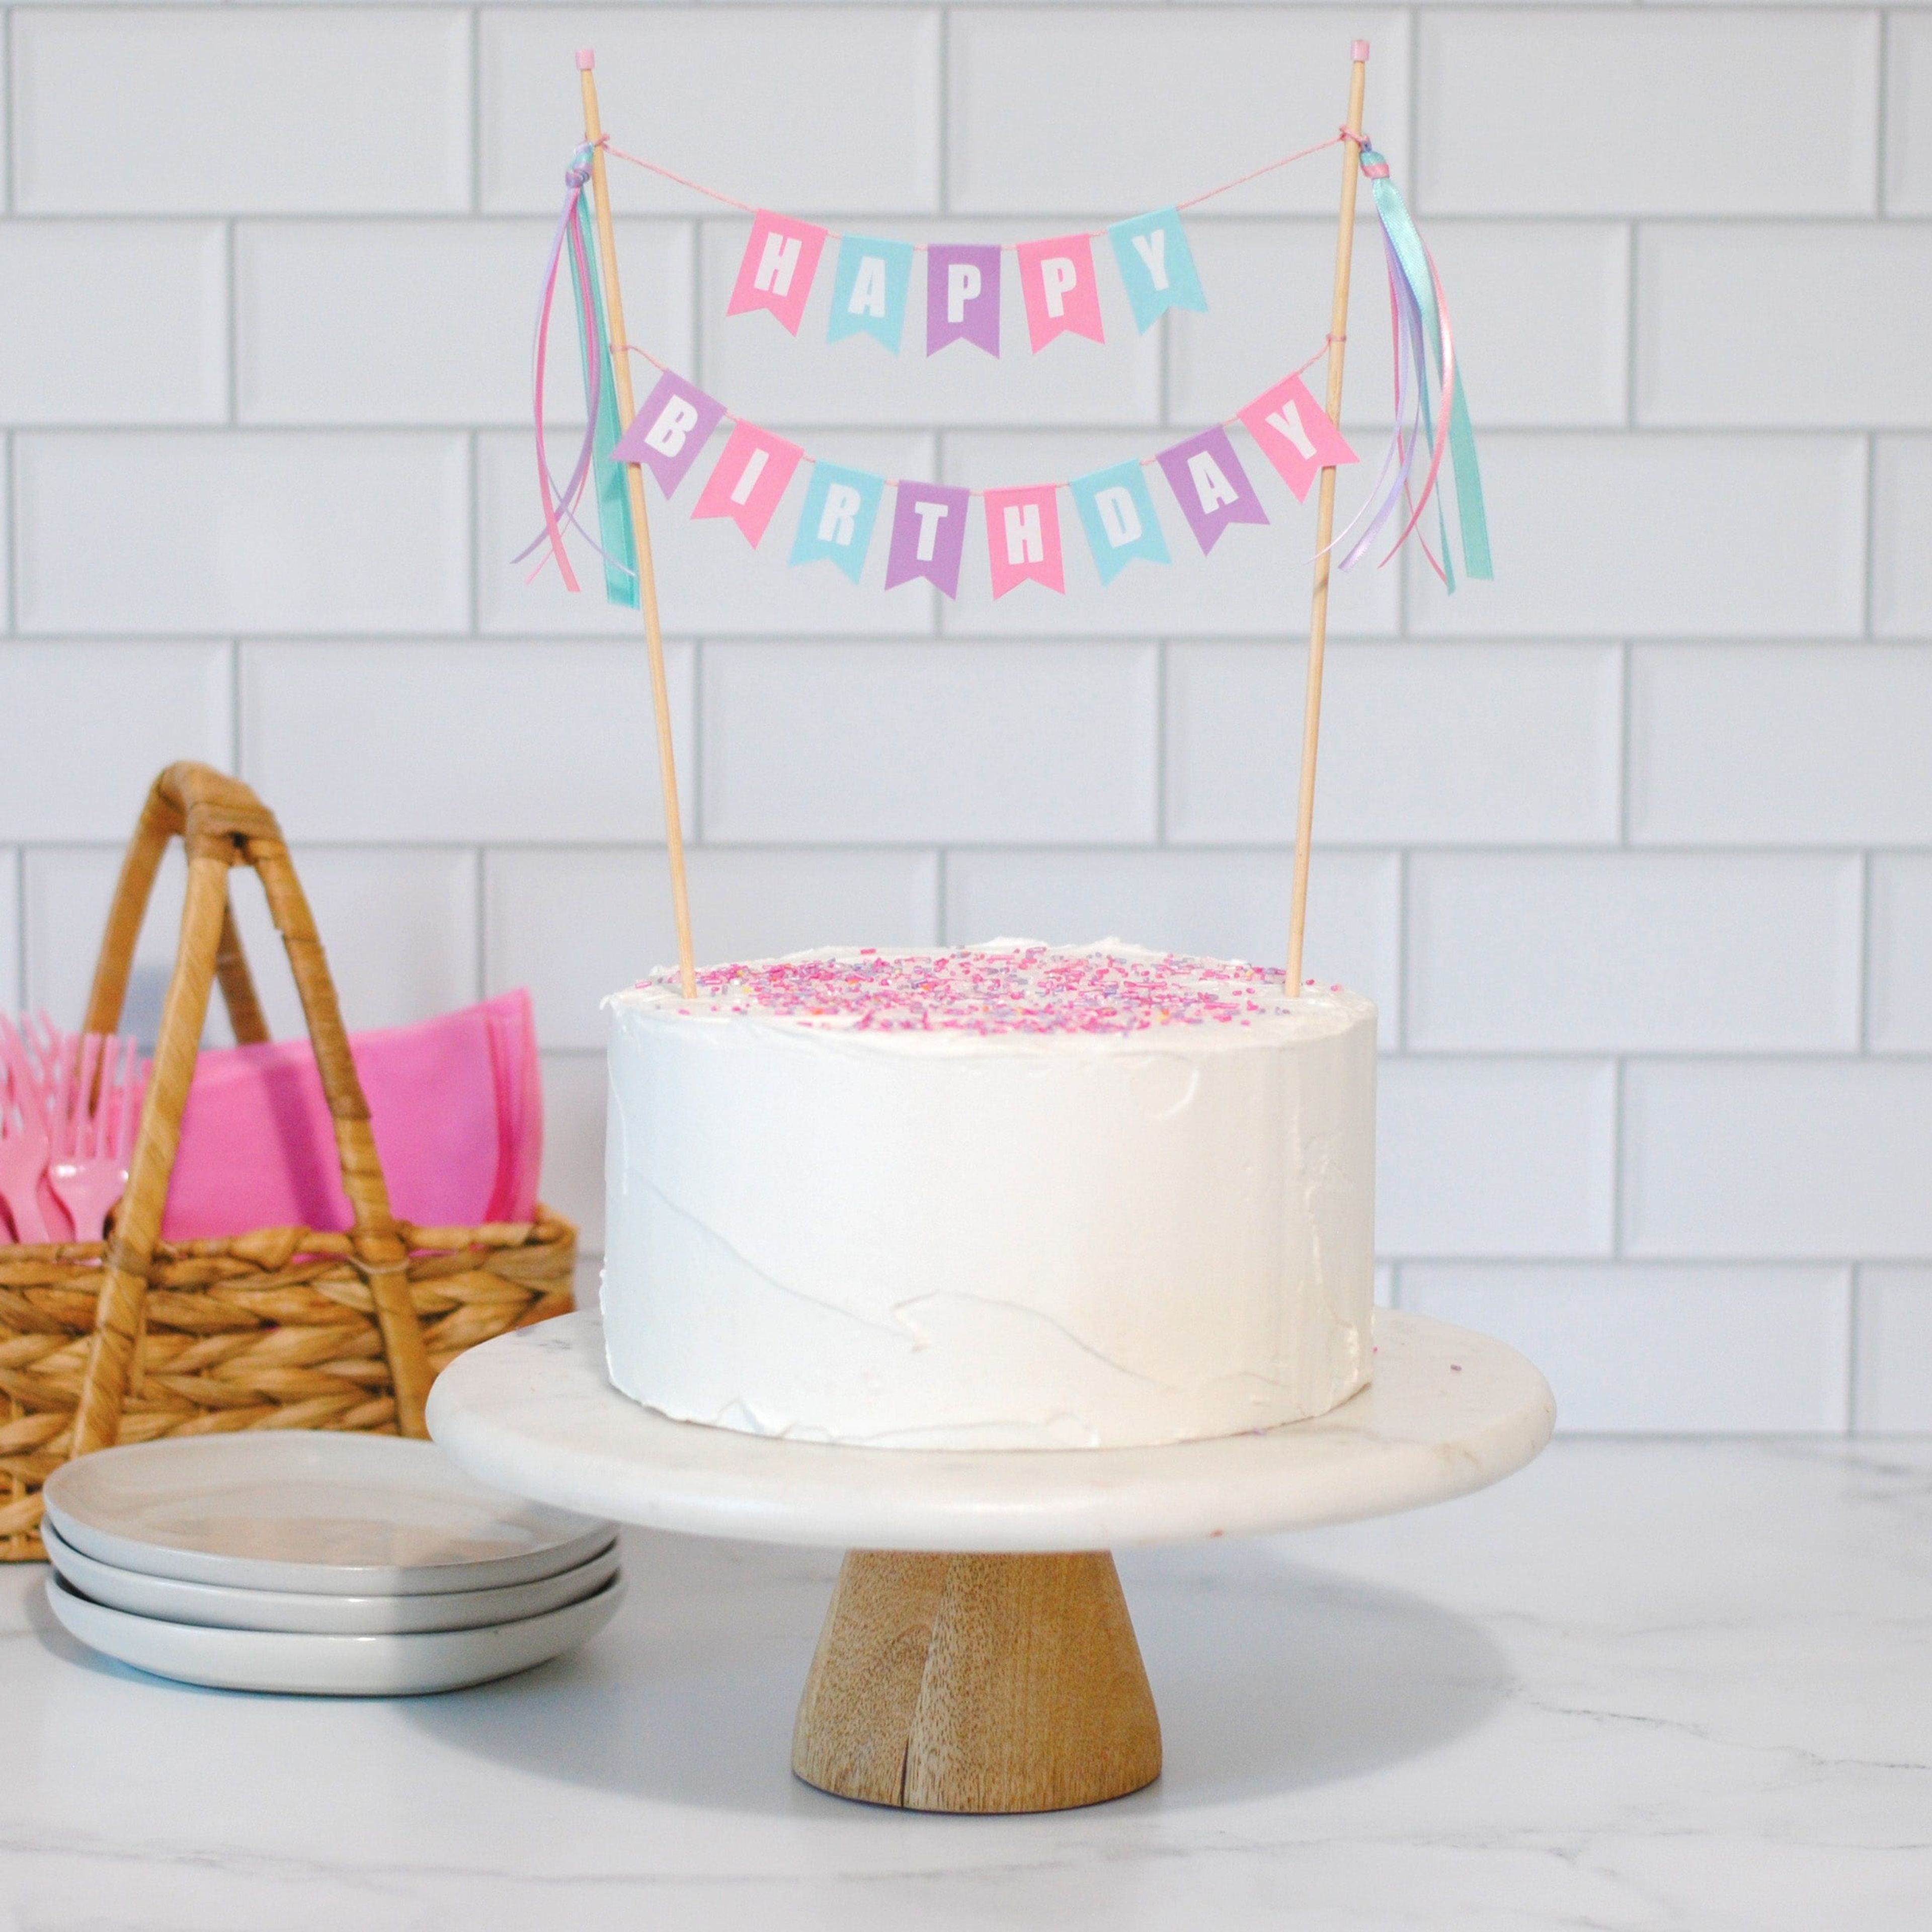 HAPPY BIRTHDAY Cake Topper (Cotton Candy Colors)